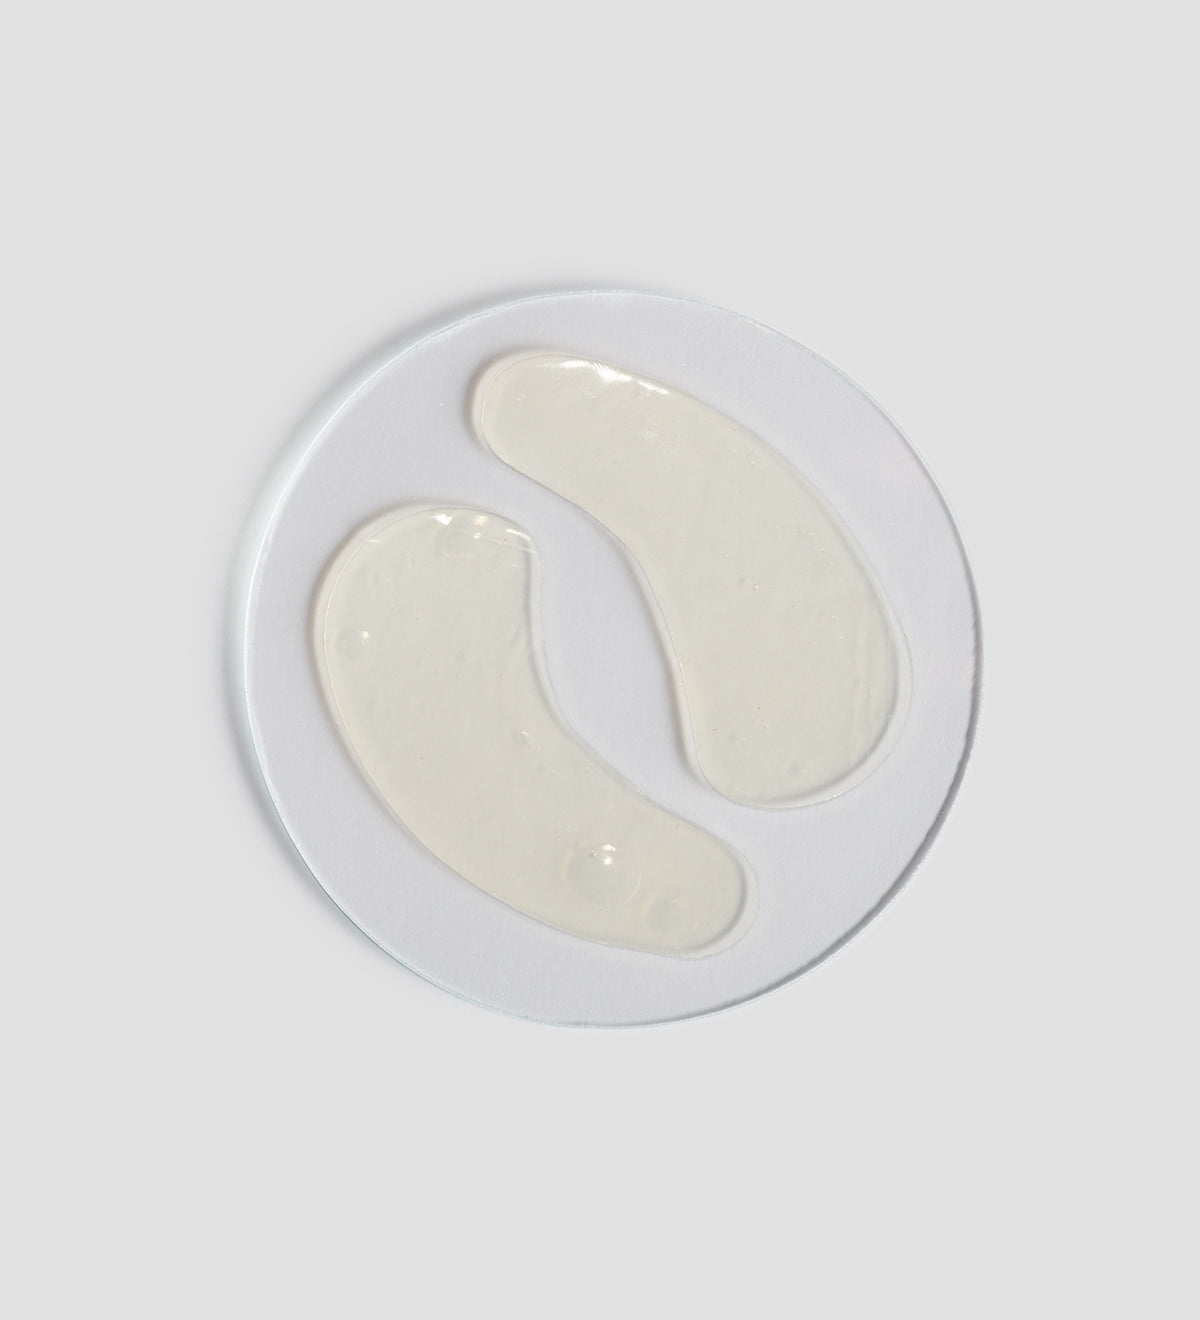 Sublime Skin Anti Aging Eye Patch